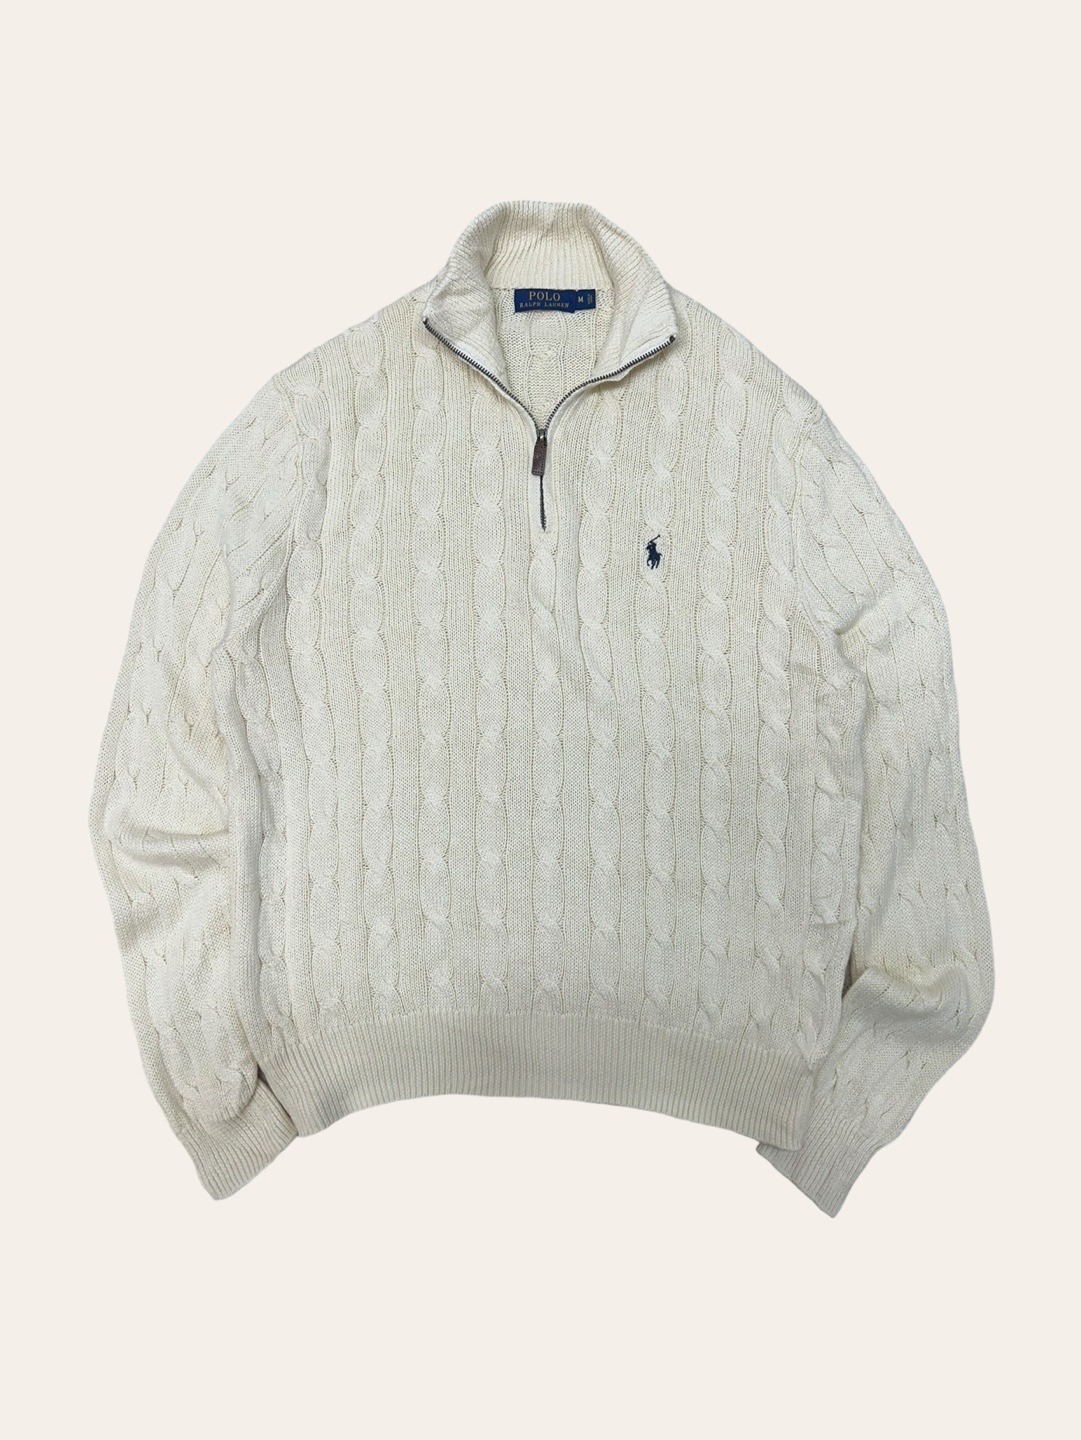 (From USA)Polo ralph lauren ivory color cotton cable pullover M